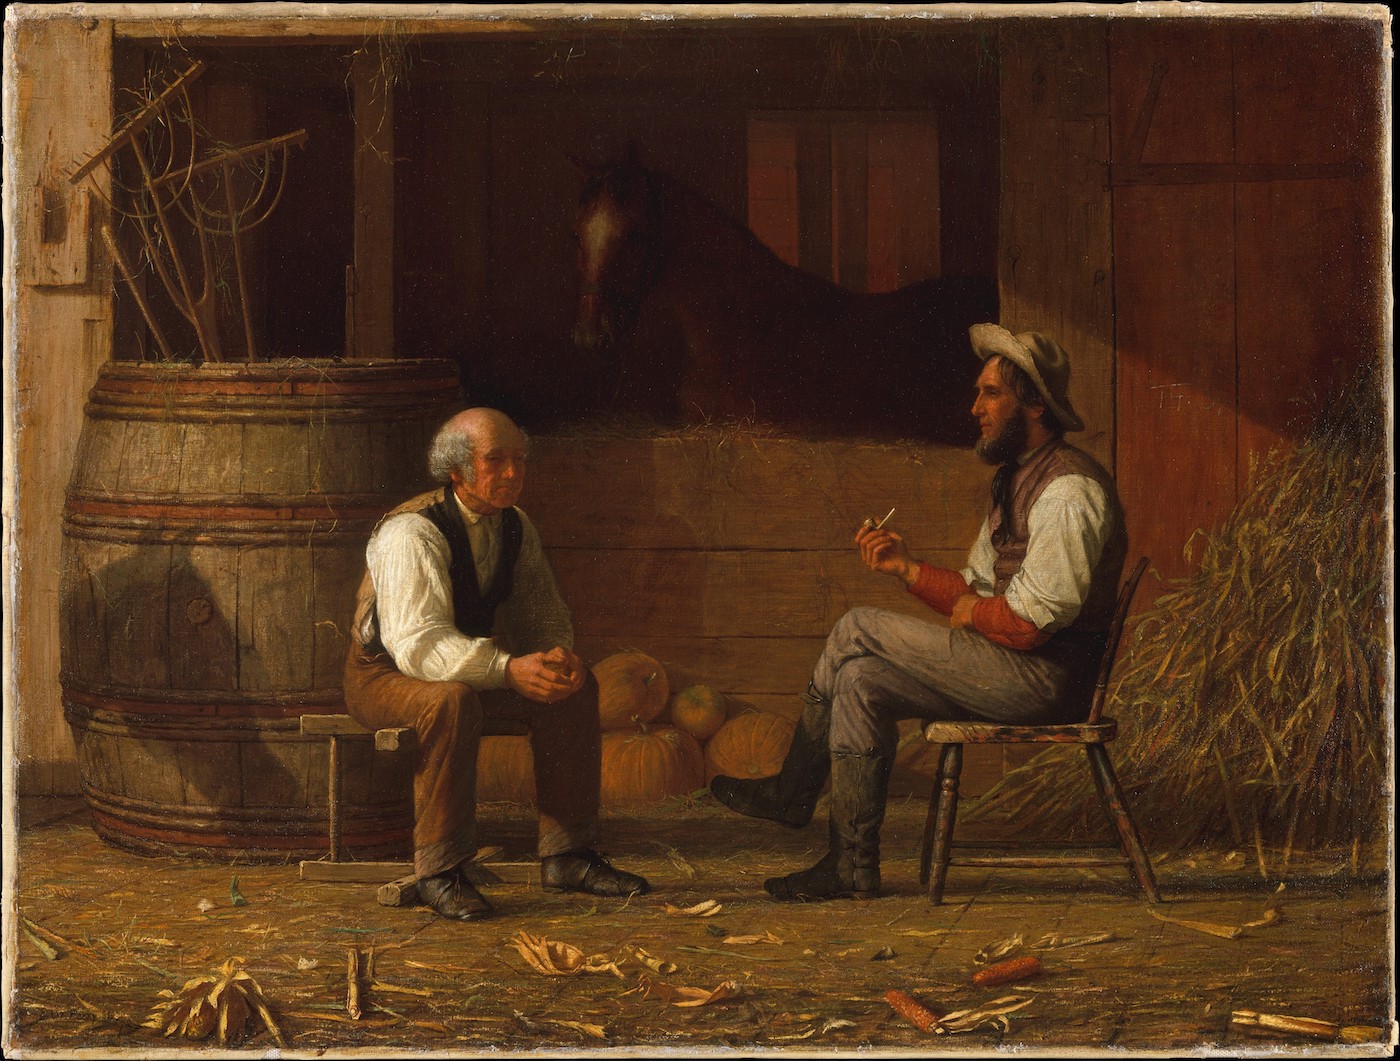  Talking It Over by Enoch Wood Perry, 1872